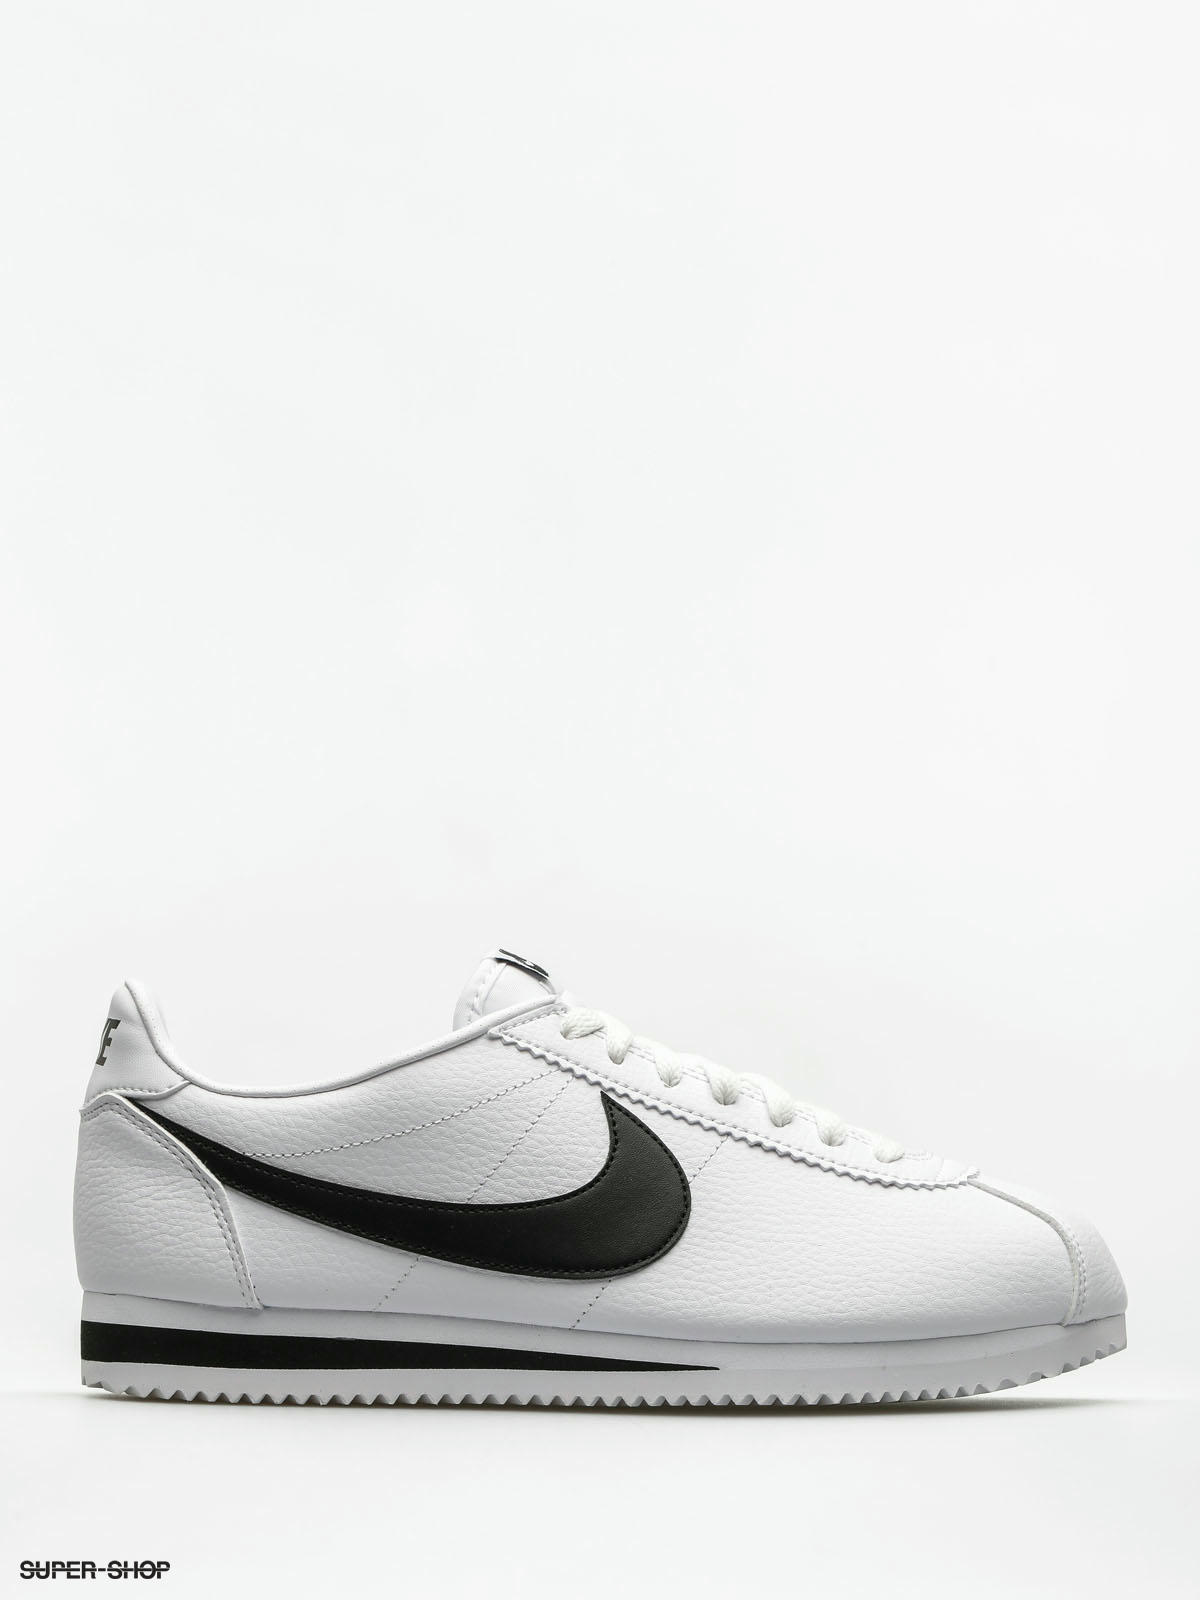 nike classic cortez leather shoes